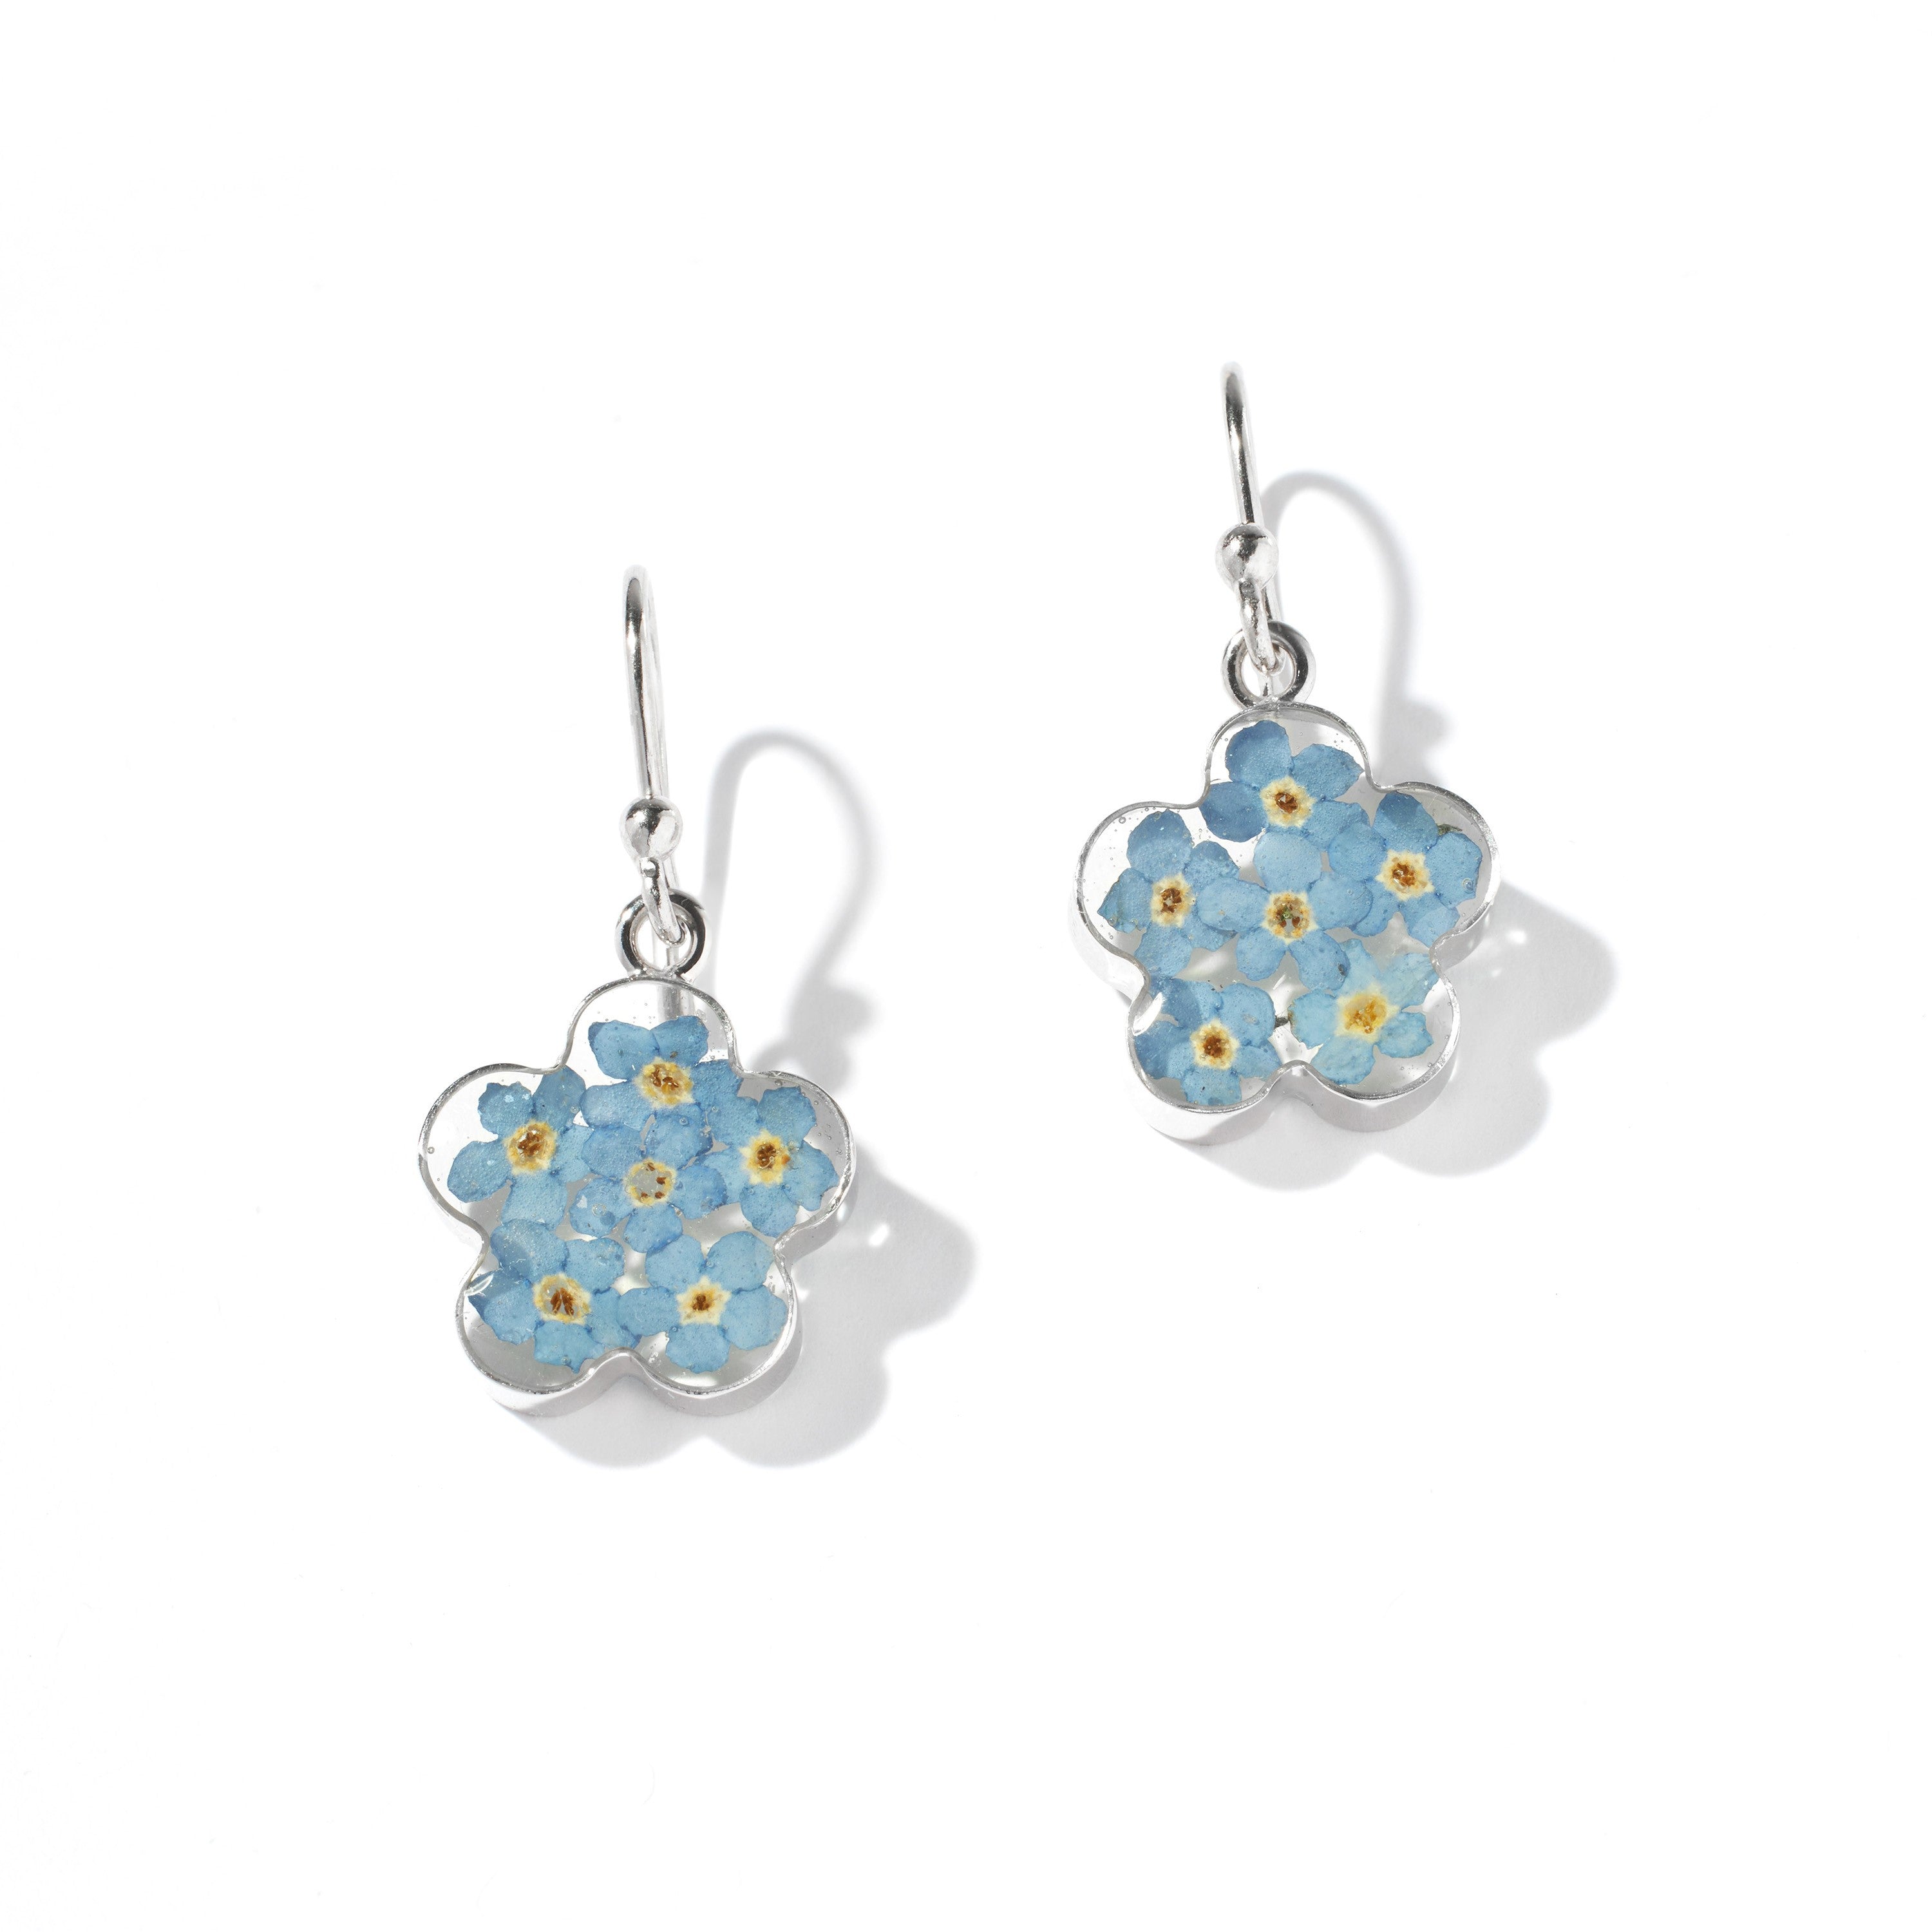 Dira Earrings with Forget-Me-Not Flowers